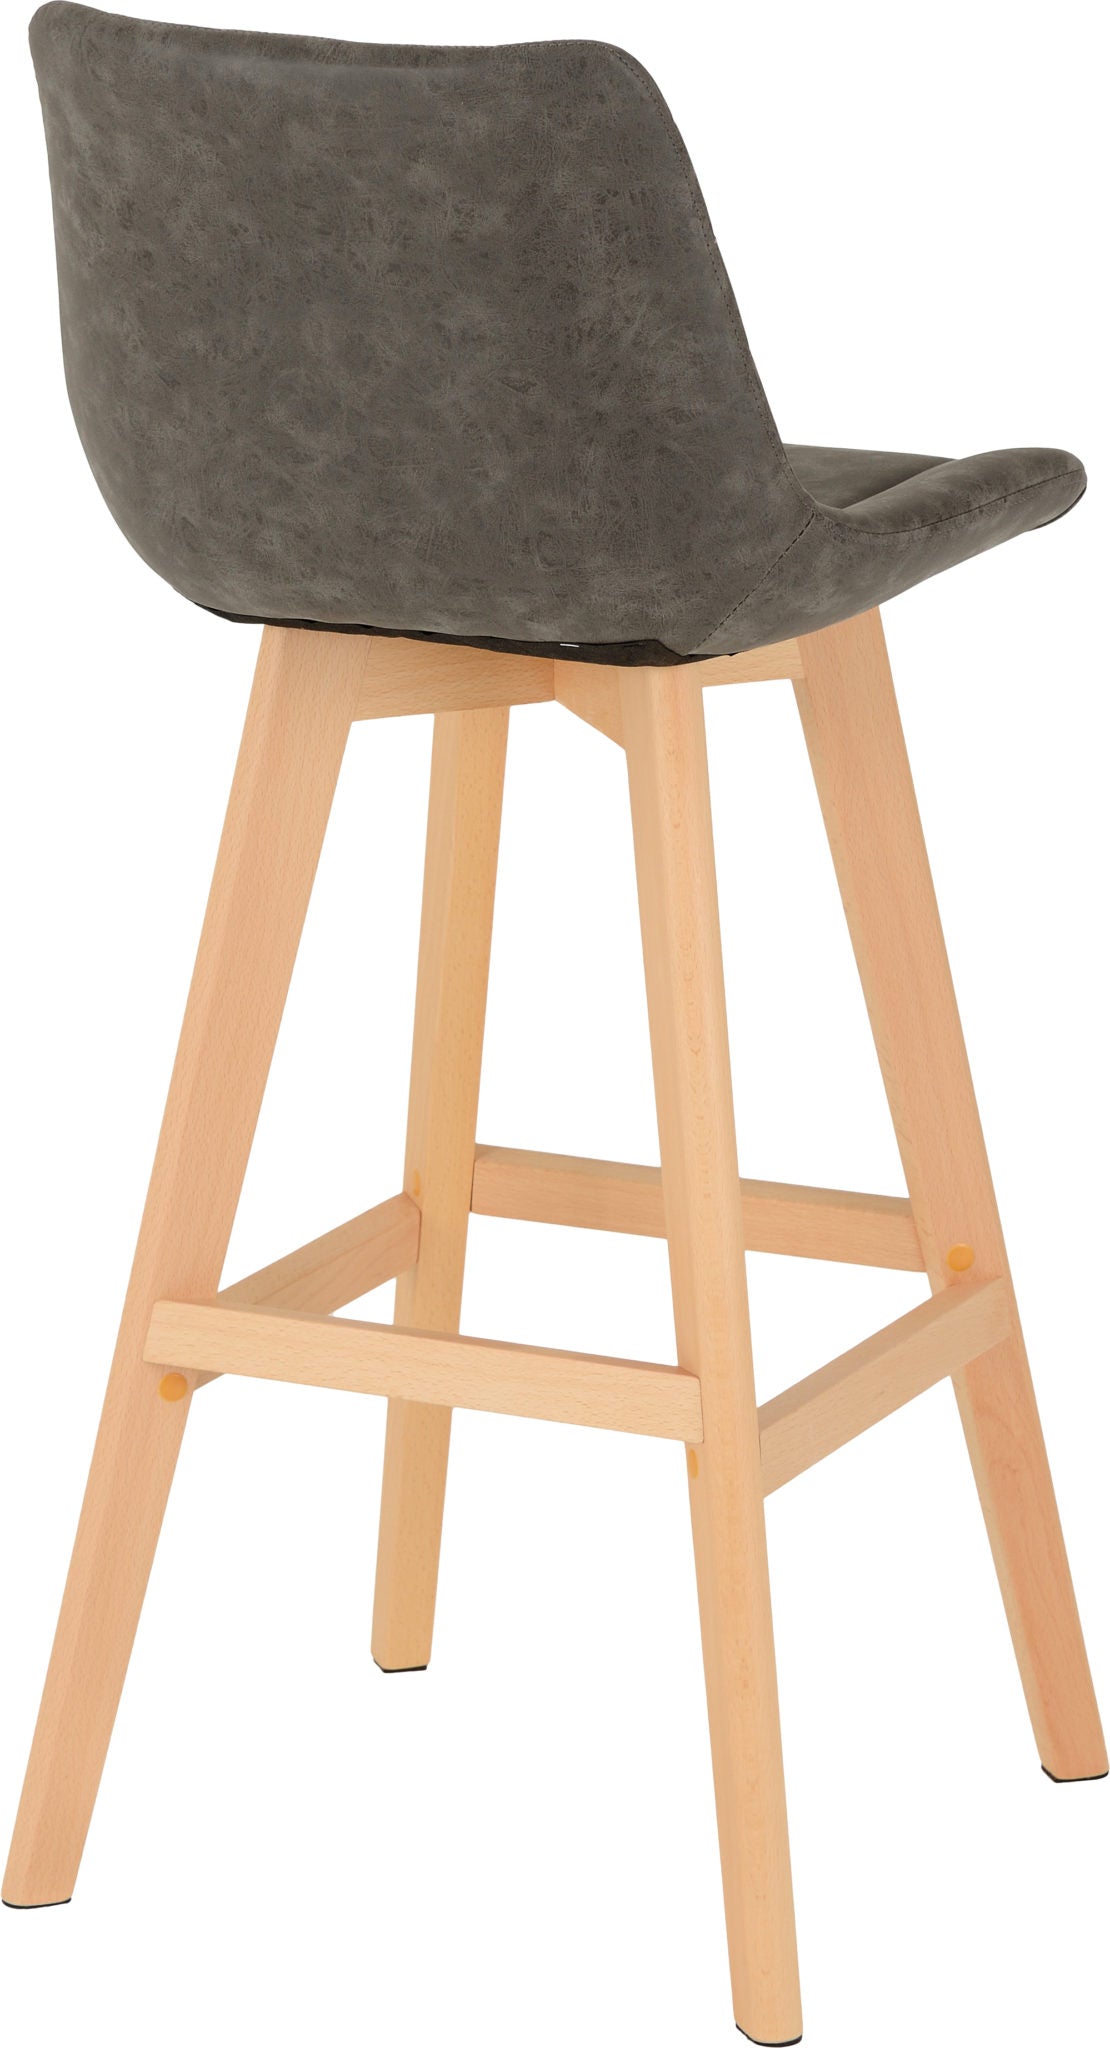 Brisbane Bar Chair  Grey Faux Leather- The Right Buy Store